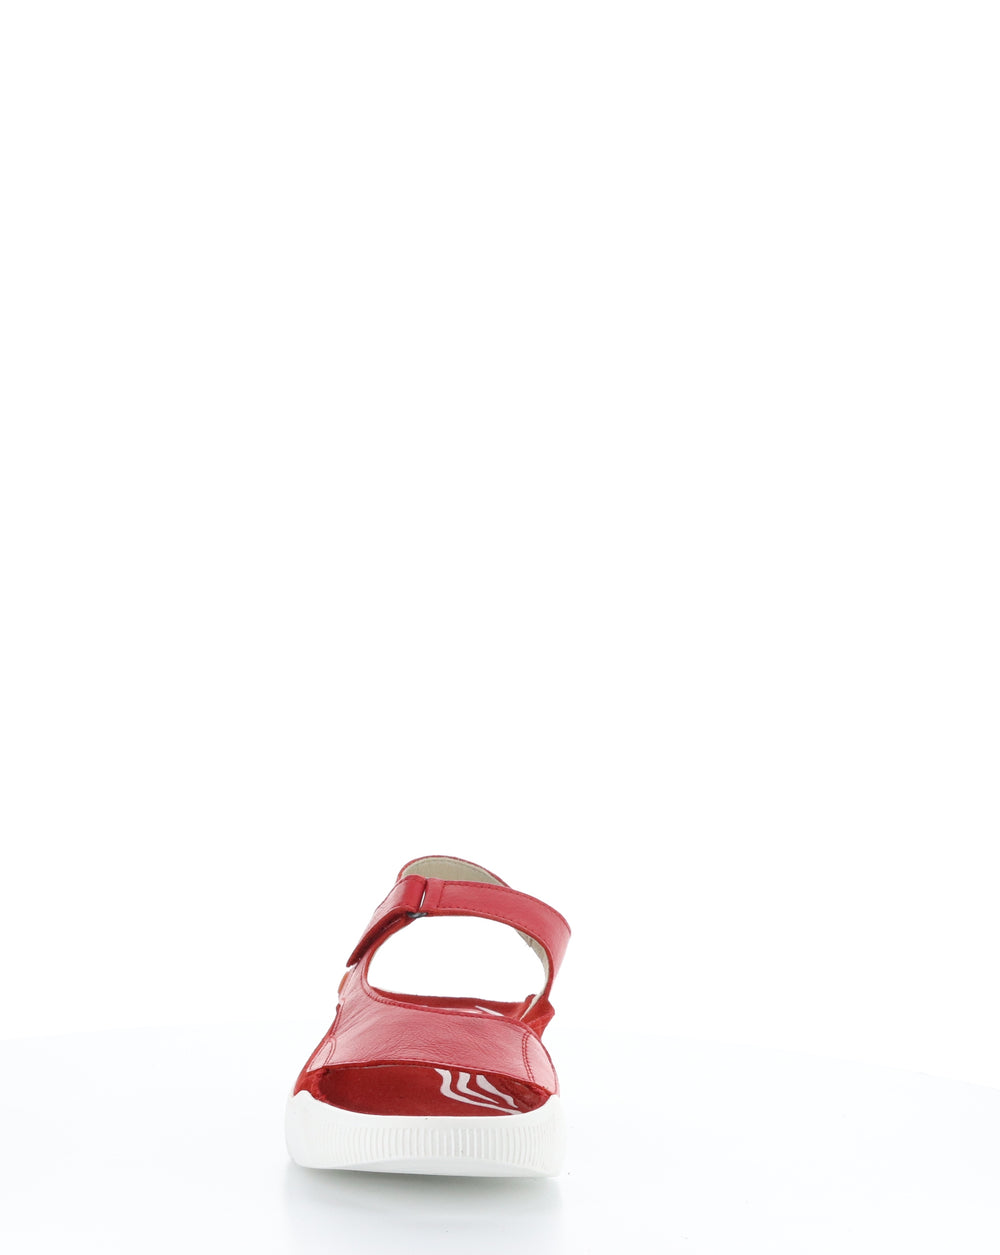 WEAL712SOF 005 CHERRY RED Velcro Sandals